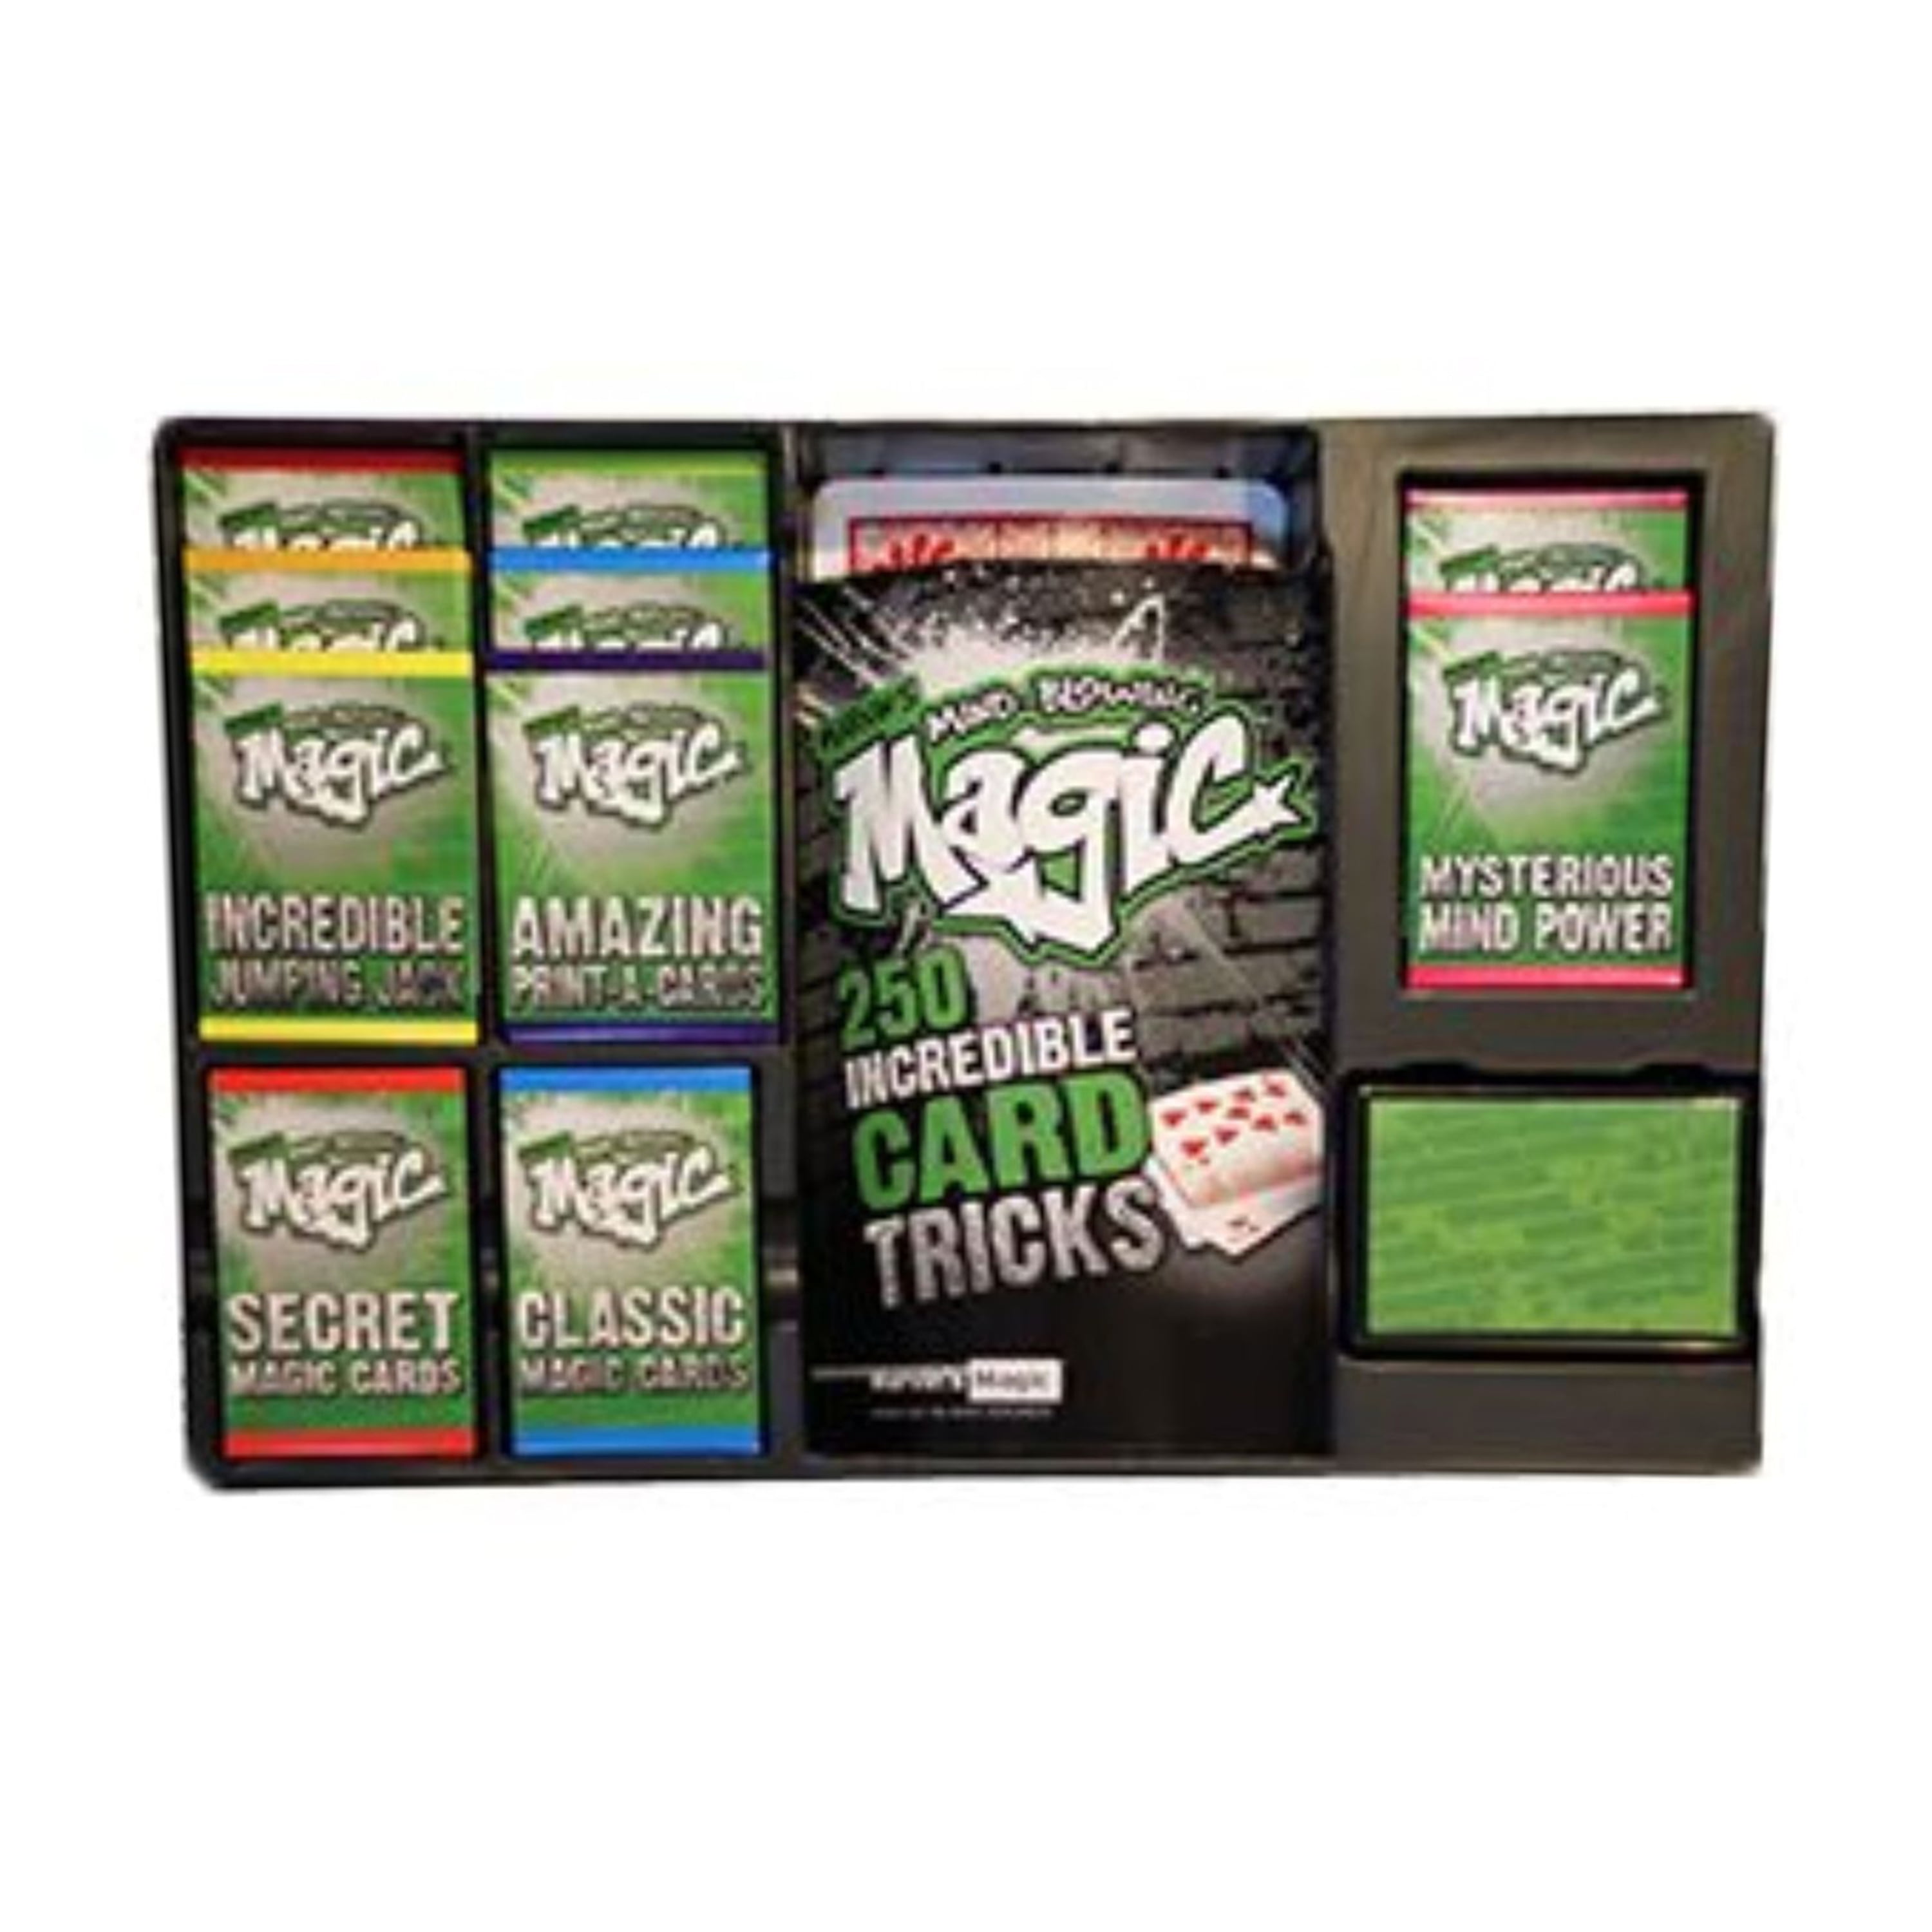 Marvins Mind Blowing Magic 250 Incredible Card Tricks Complete for sale online 